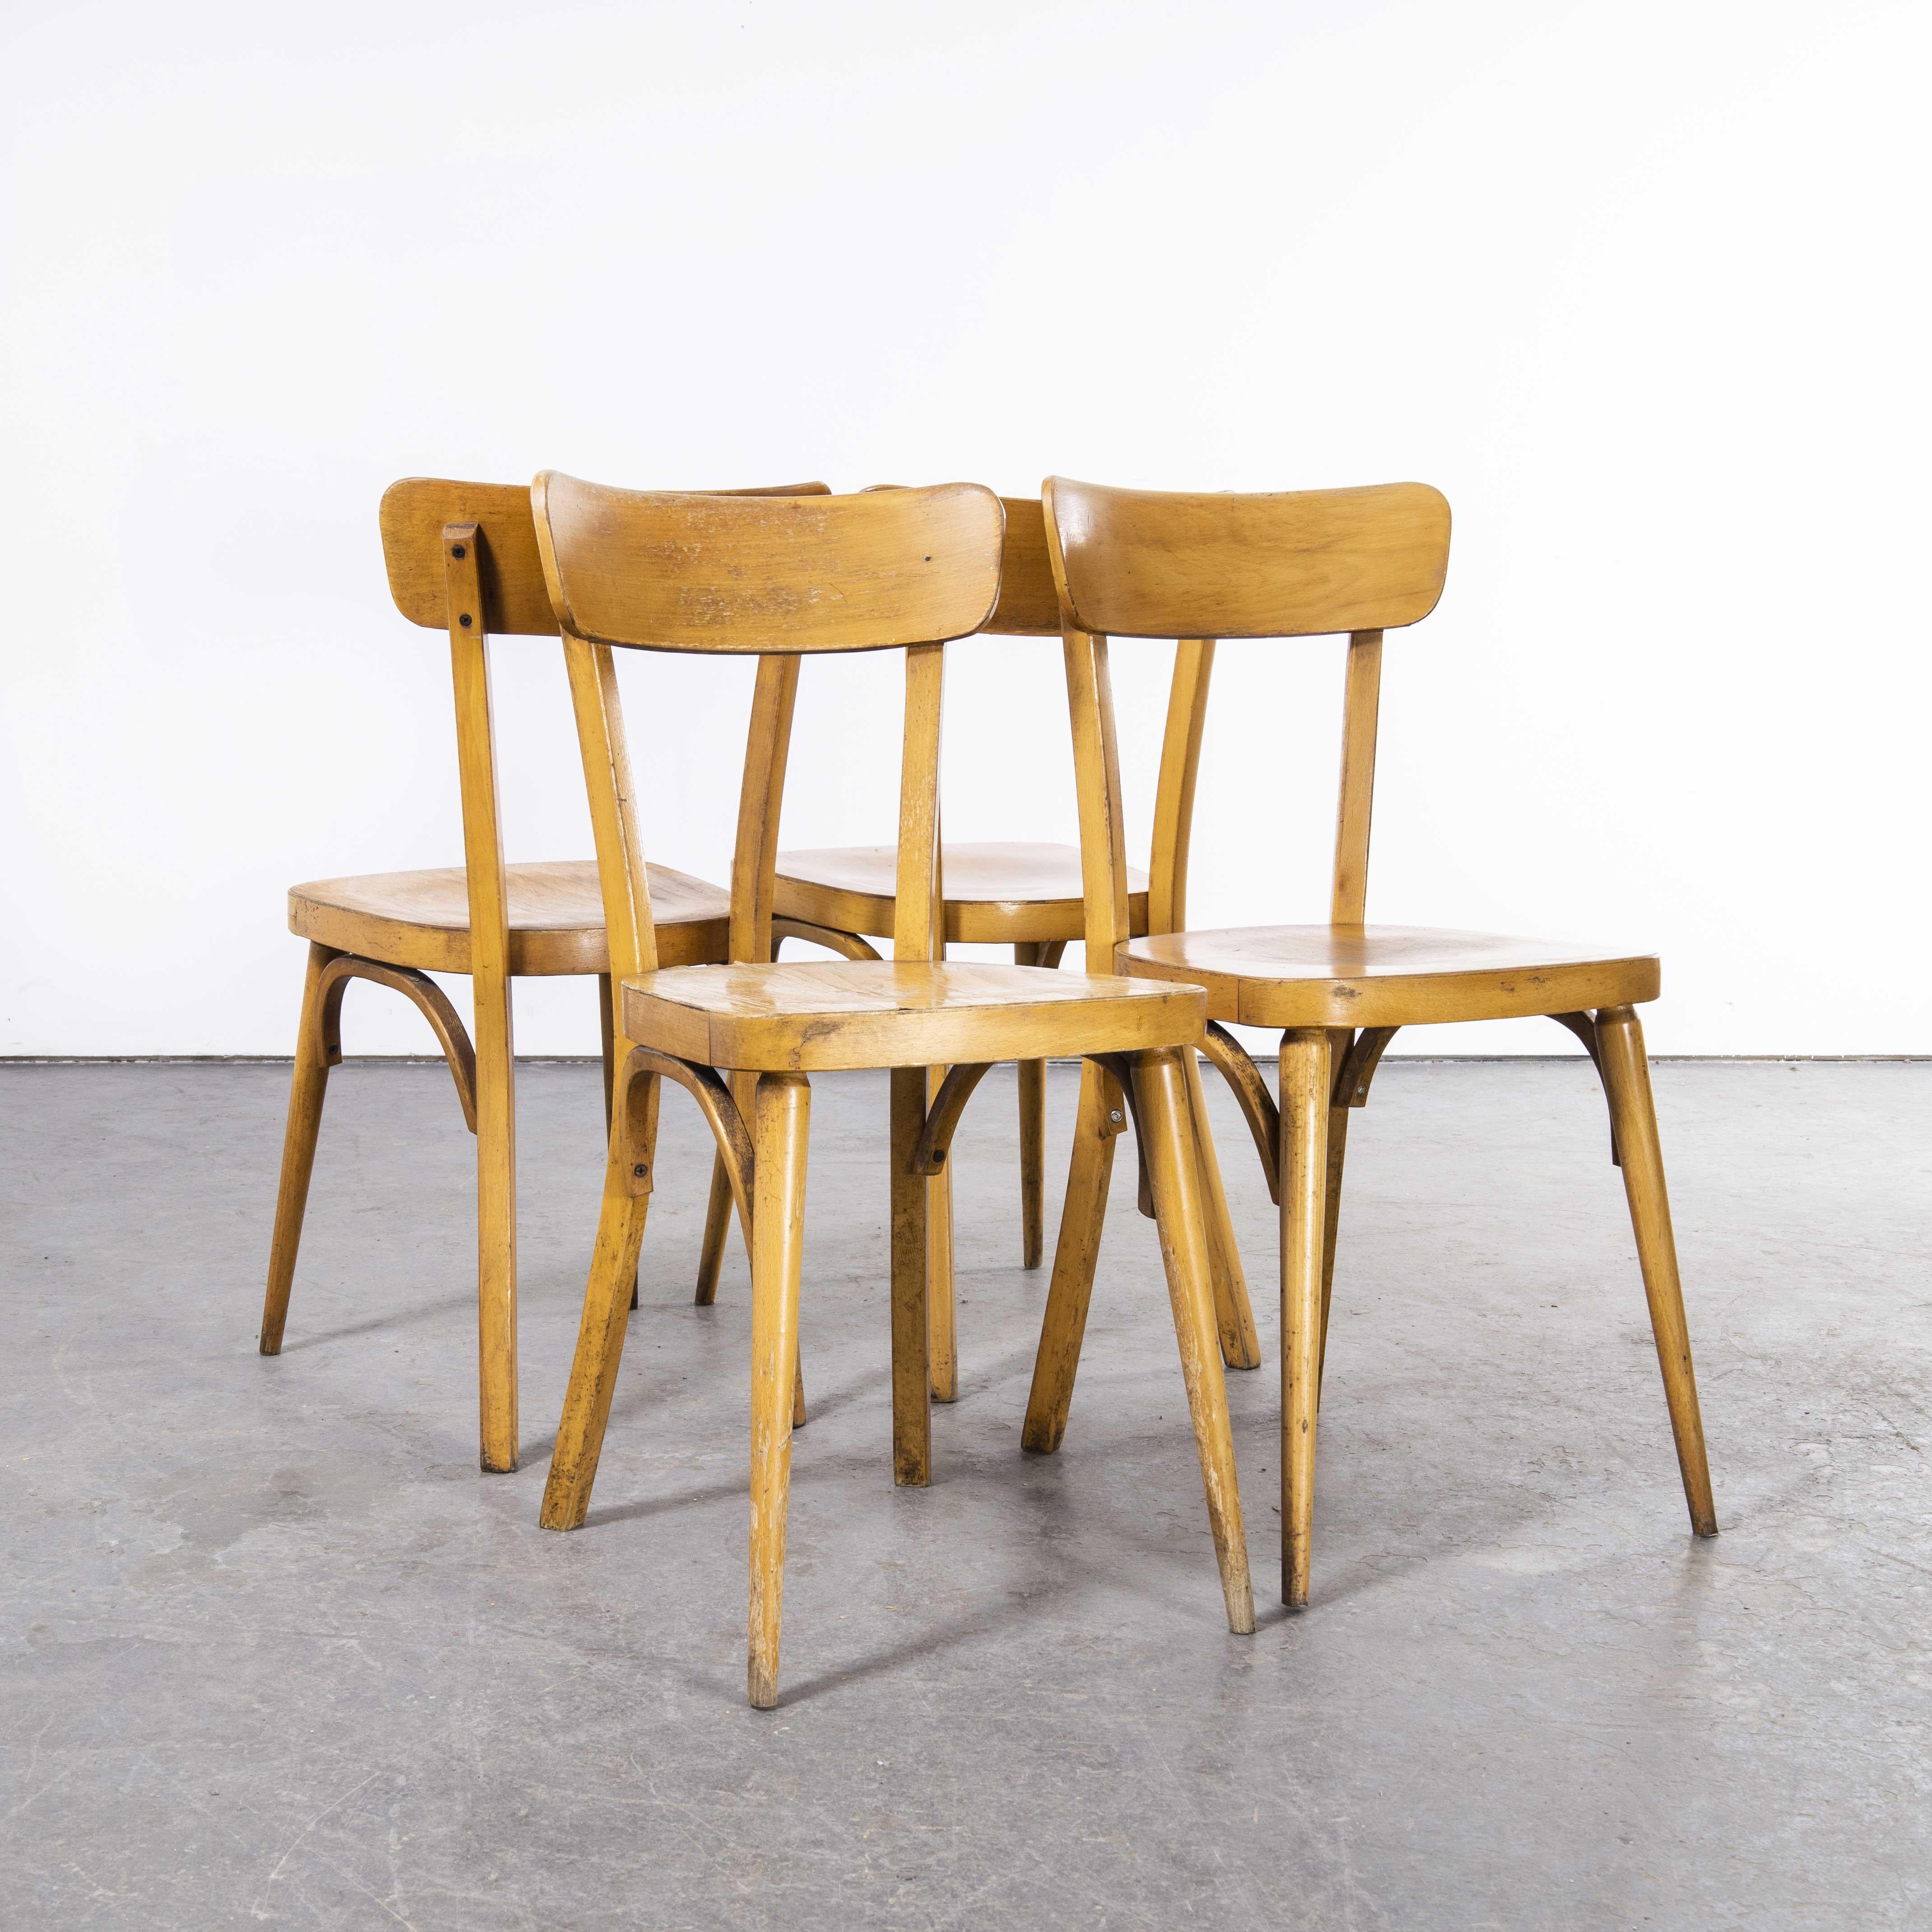 1950's Baumann Bentwood Saddle Back Dining Chair, Honey, Set of Four For Sale 3